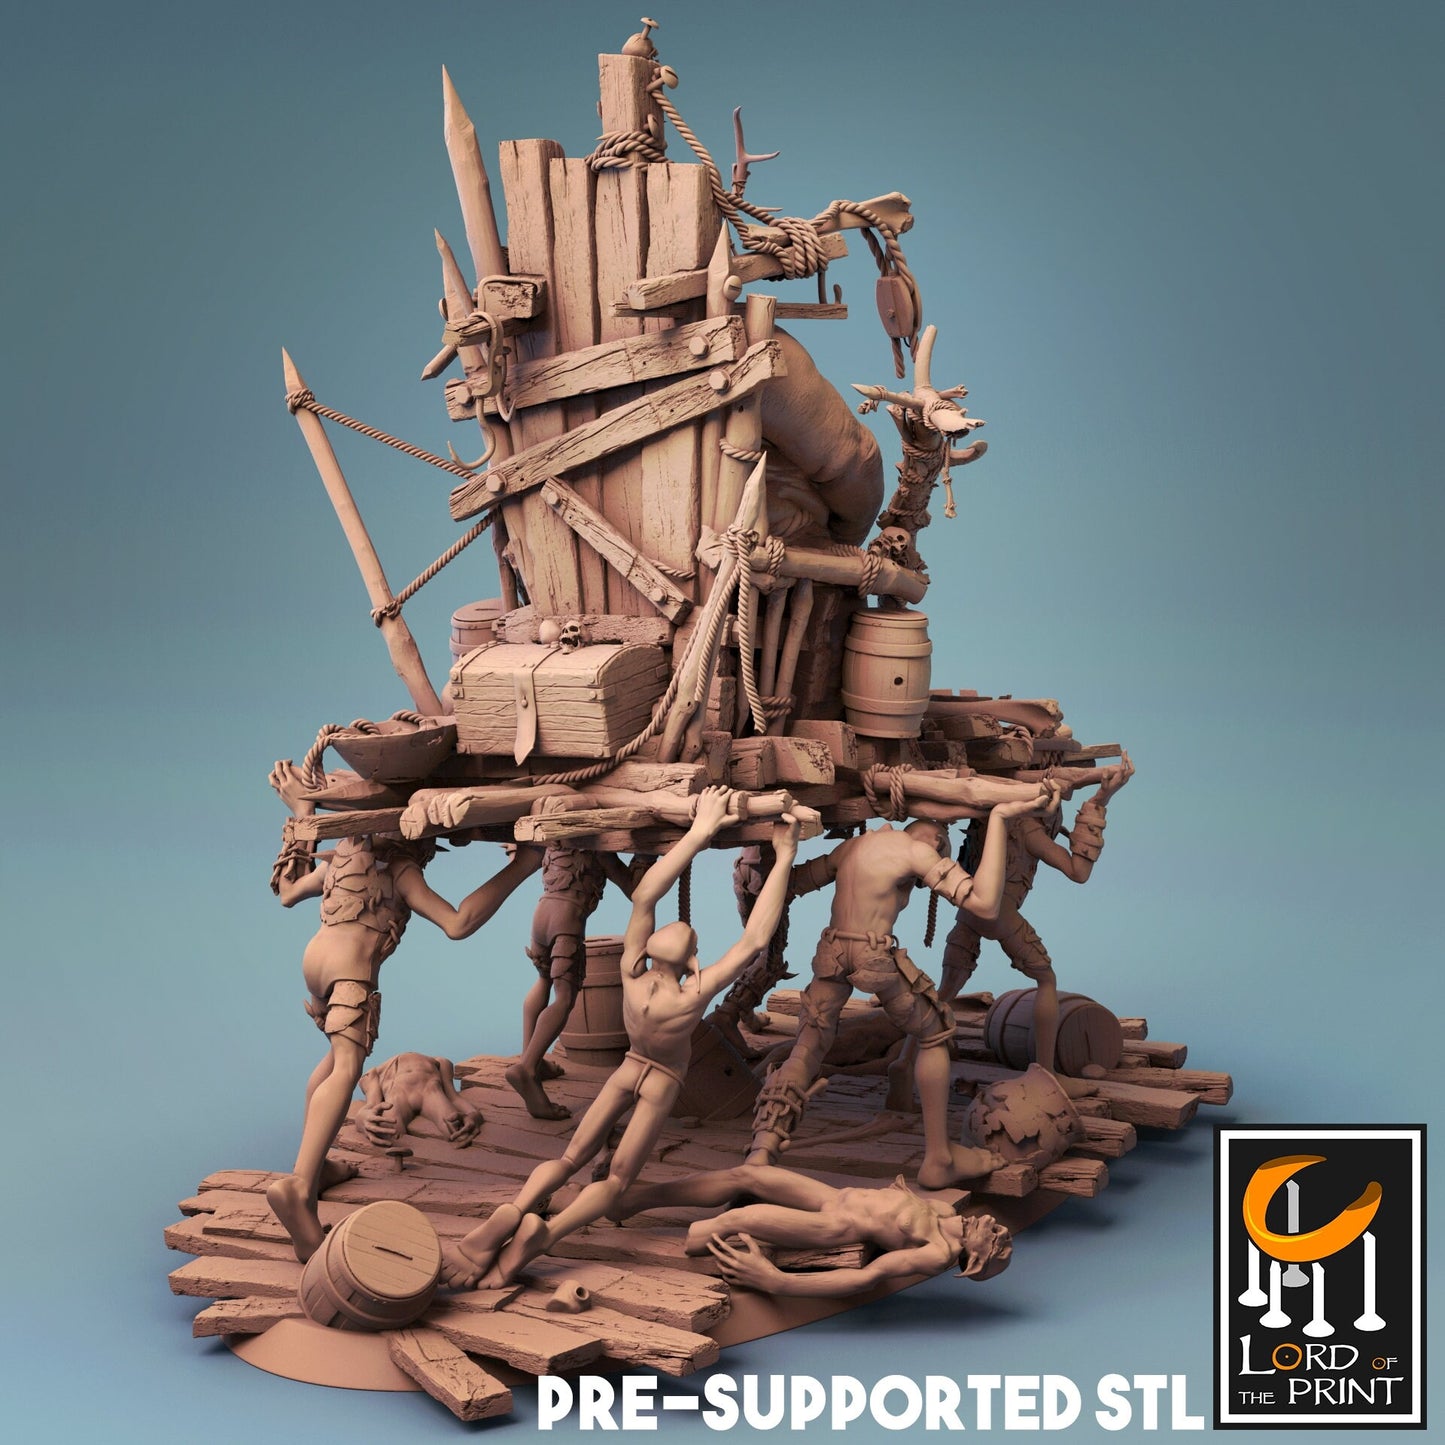 Ogre king palanquin - Lord of the Print - ideal for Dungeons and Dragons and other Tabletop RPGs/Wargaming/D&D